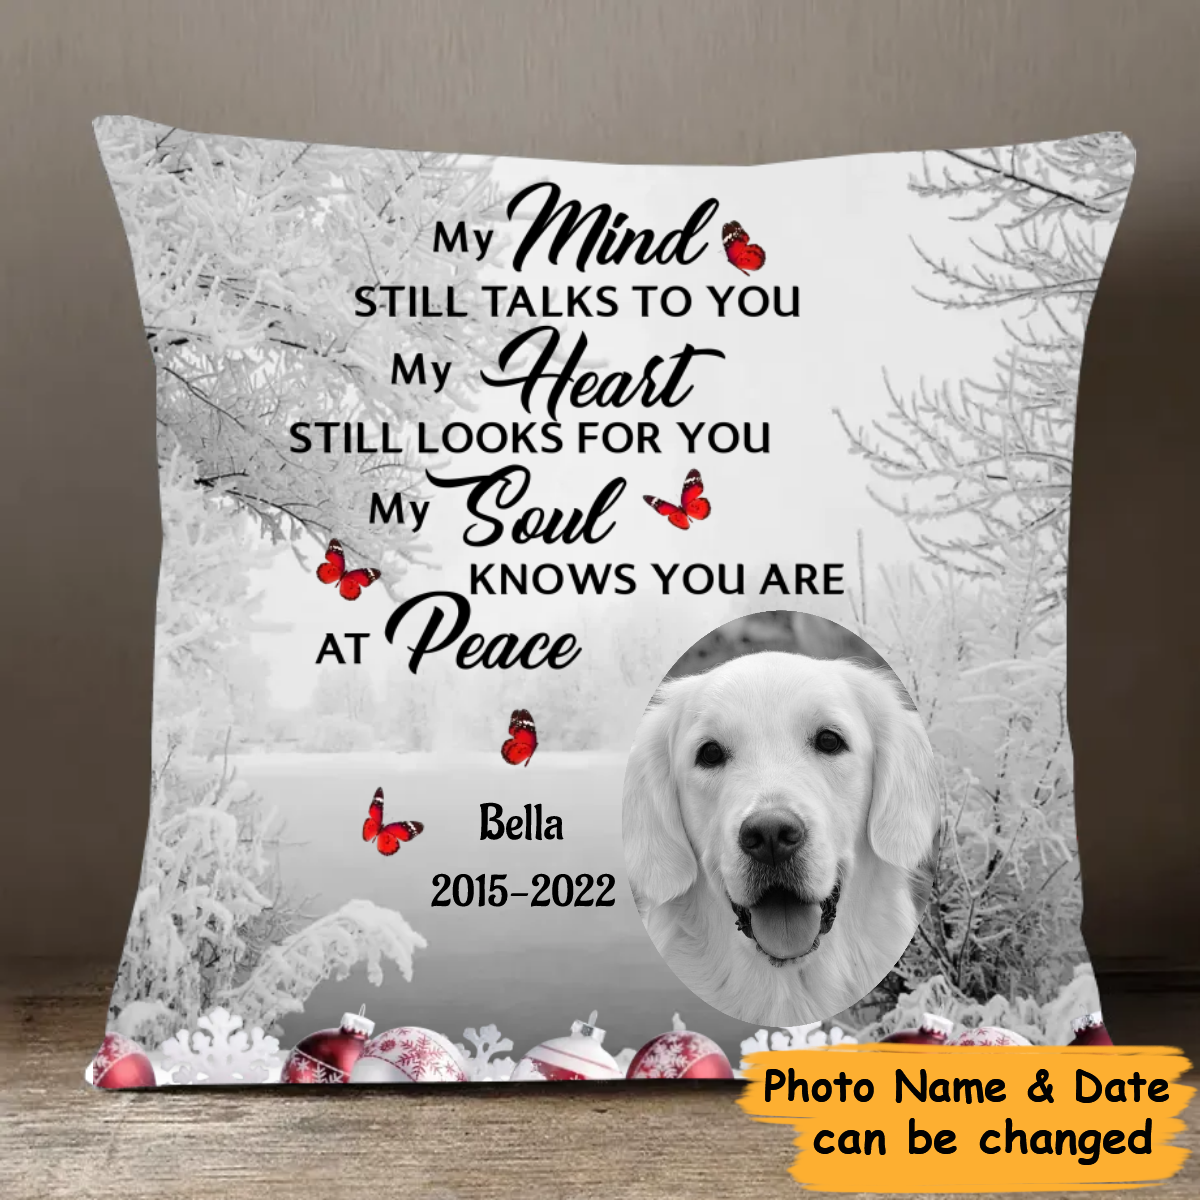 Personalized Memorial Photo Pillow Cover - Memorial Gift Idea For Christmas - My Mind Still Talks To You